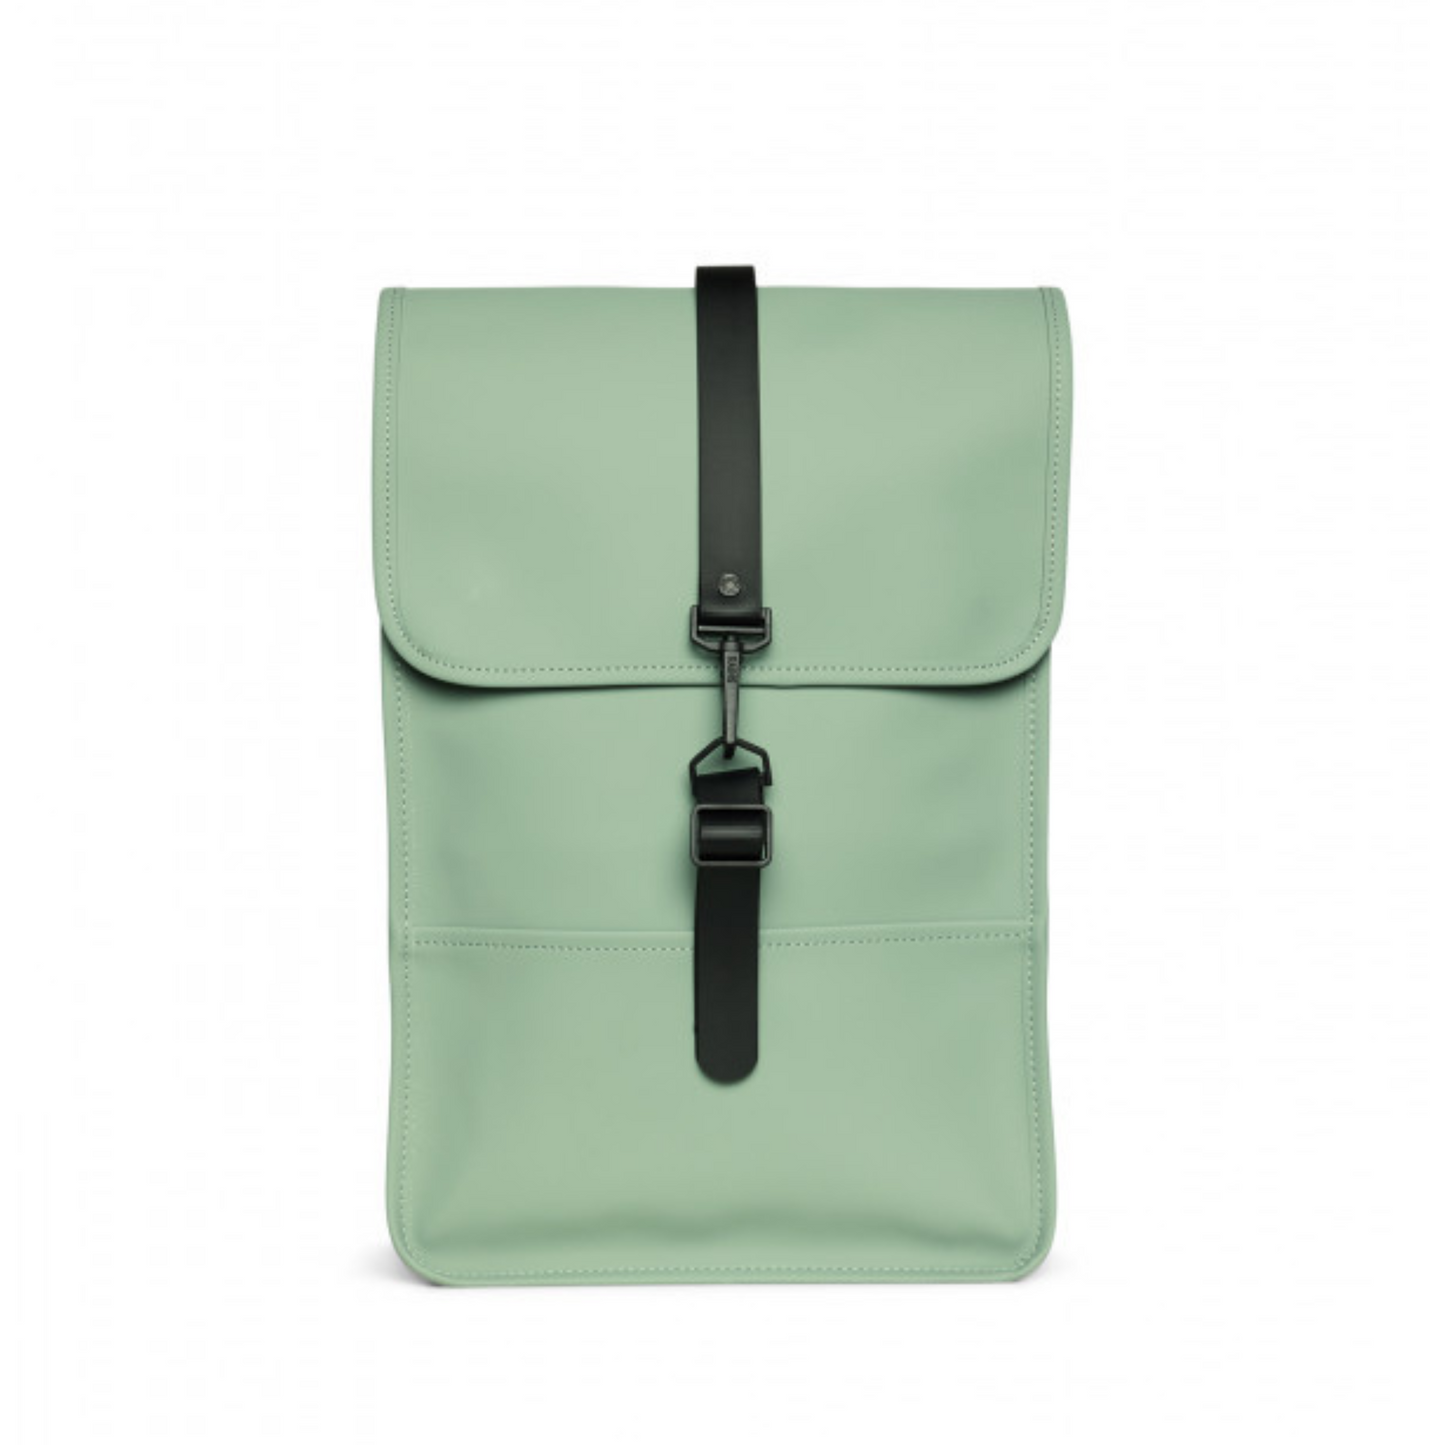 Rectangular backpack with a strap in the centre and carabiner closure